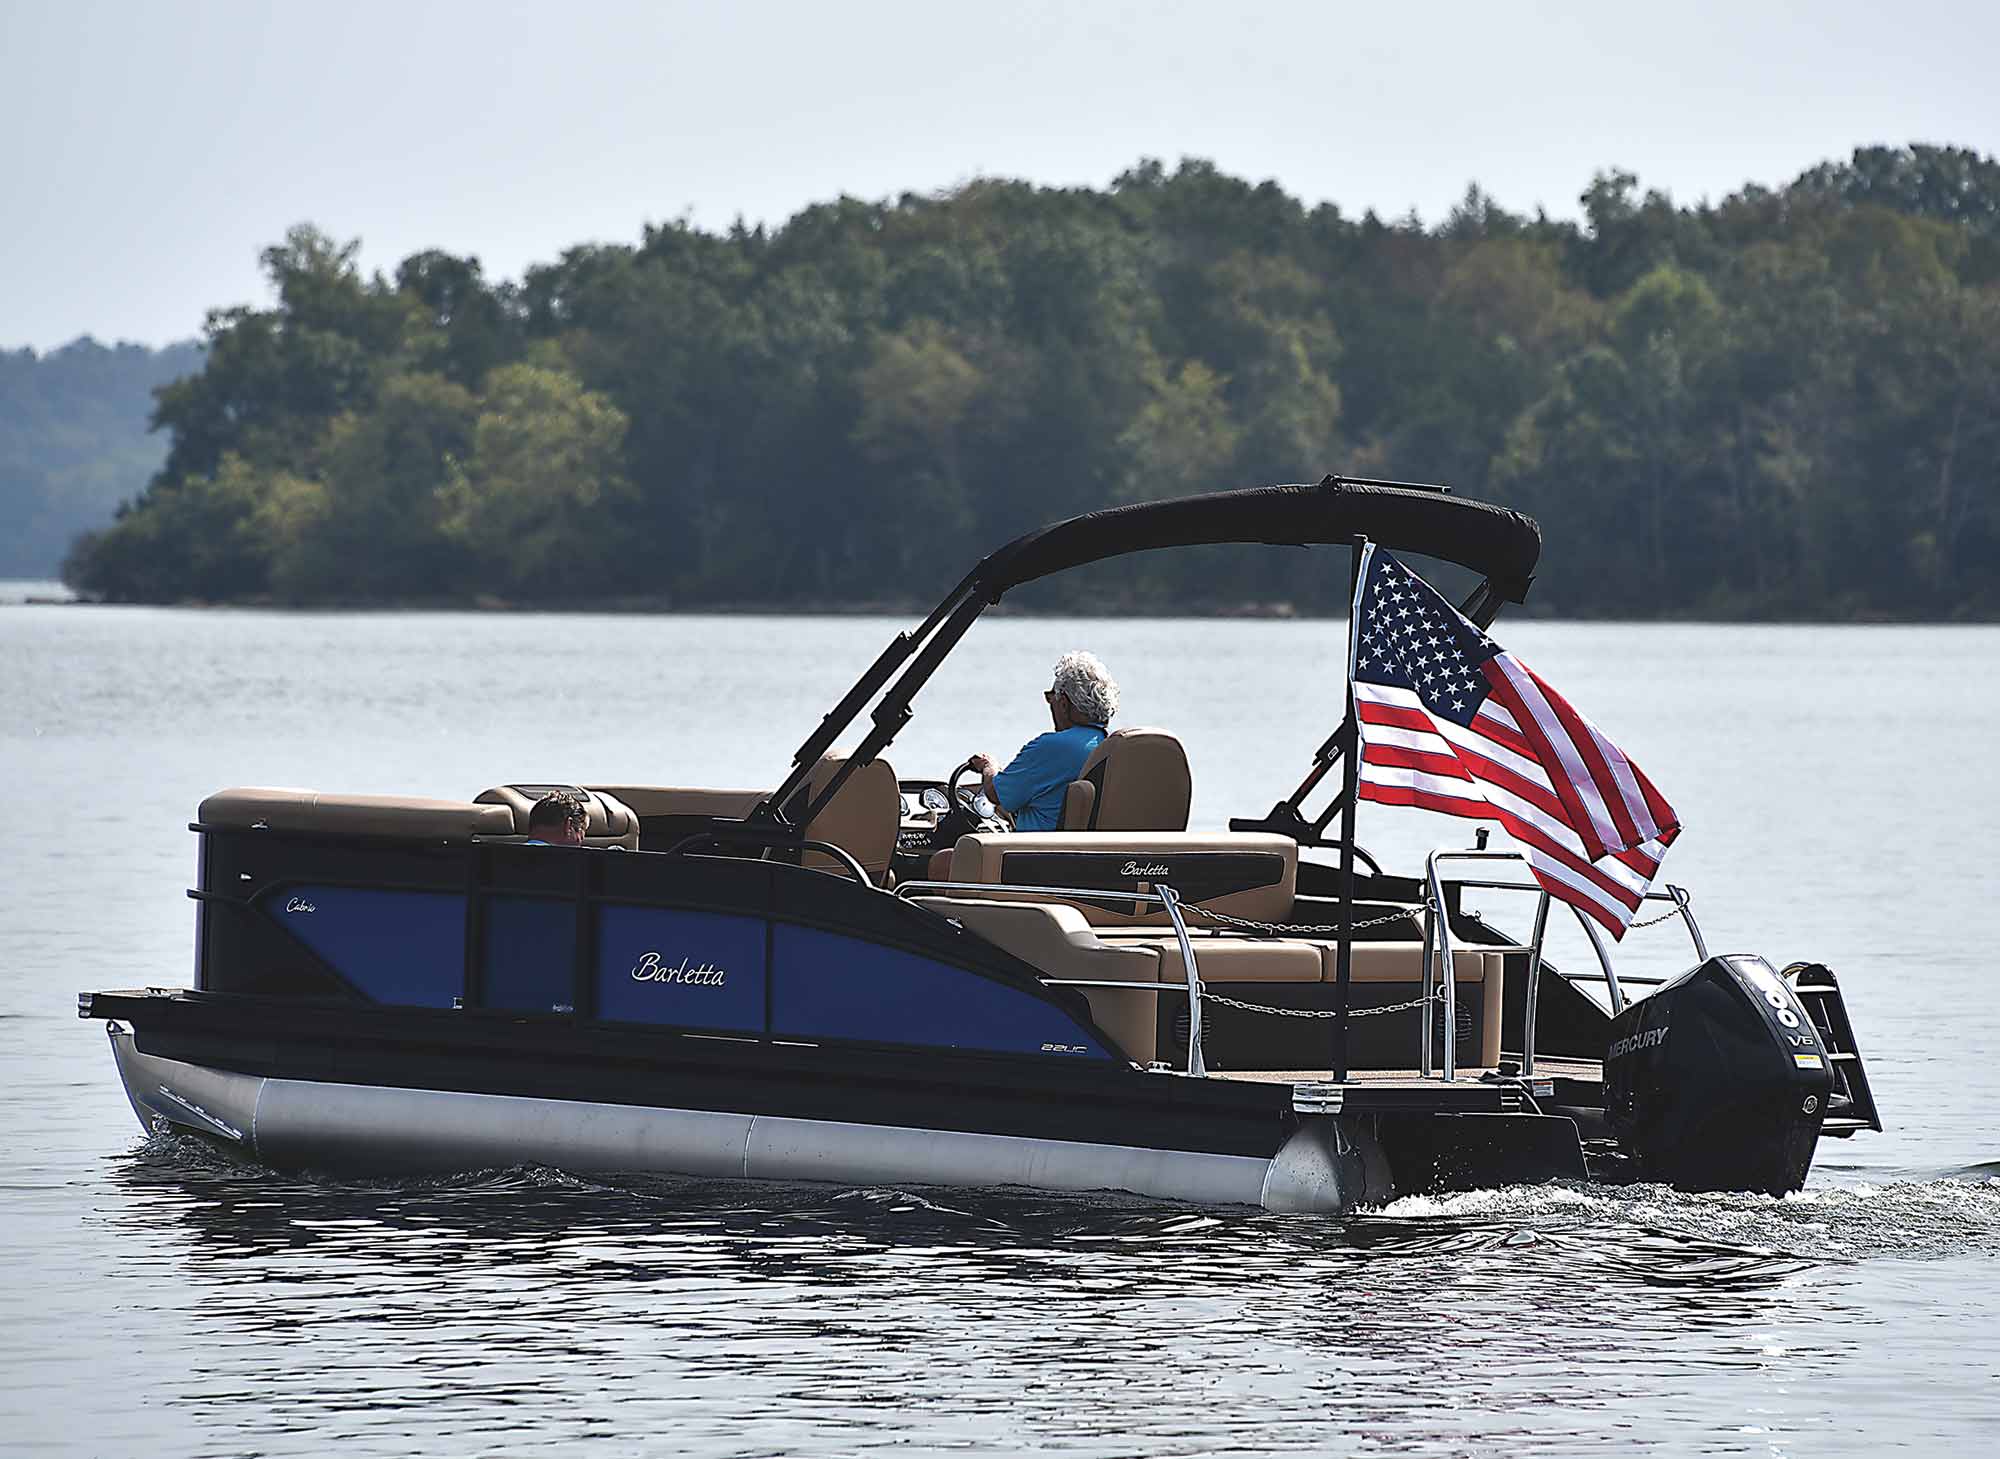 Landscape close-up photograph perspective of a man in a blue t-shirt and sunglasses driving a blue/black Barletta pontoon boat motor vehicle on the water with another passenger inside the boat plus a small American flagpole mounted stand (Lillipad Marine Flagpole/Grill Post) showing the United States of America flag waving in the air attached to the rear stern surface area of the boat